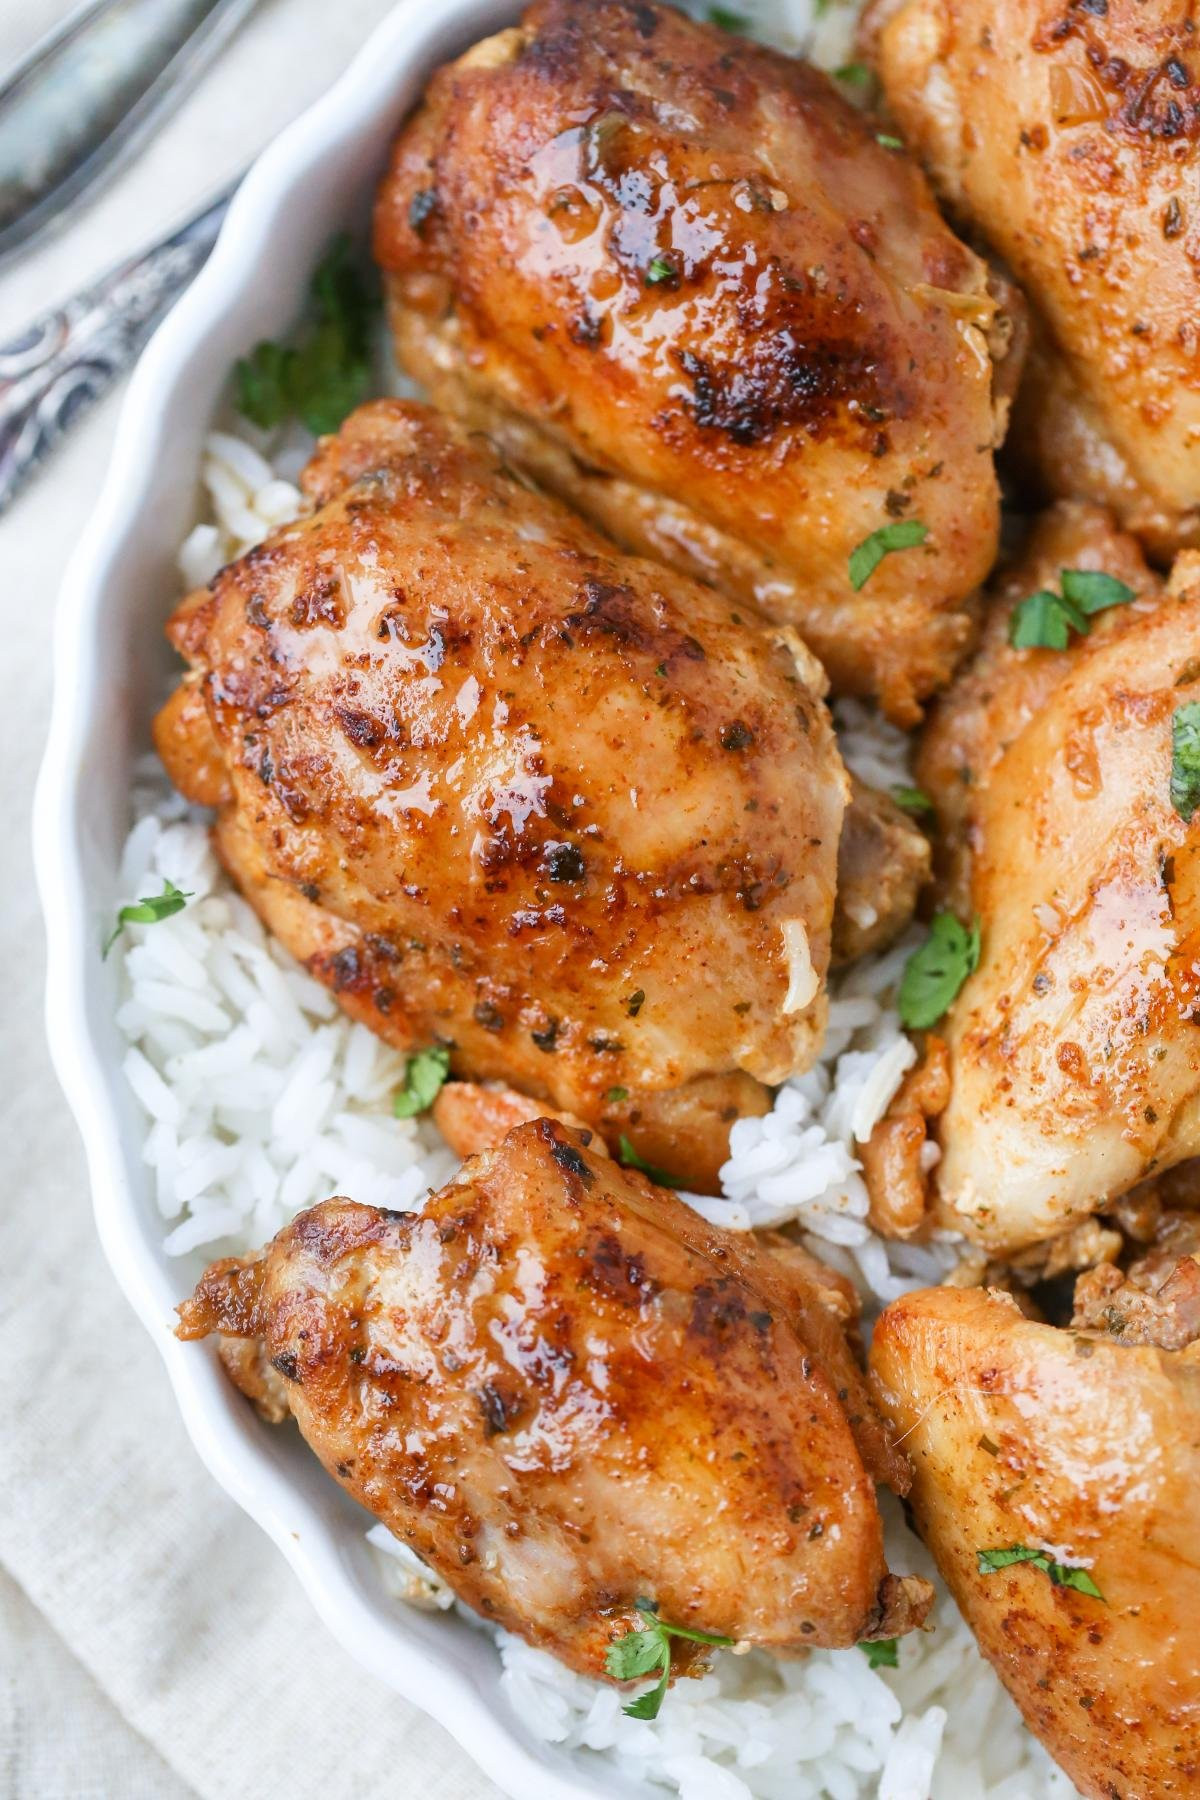 Instant Pot Chicken Thighs Time Inspirational Instant Pot Chicken Thighs Fresh or Frozen Momsdish